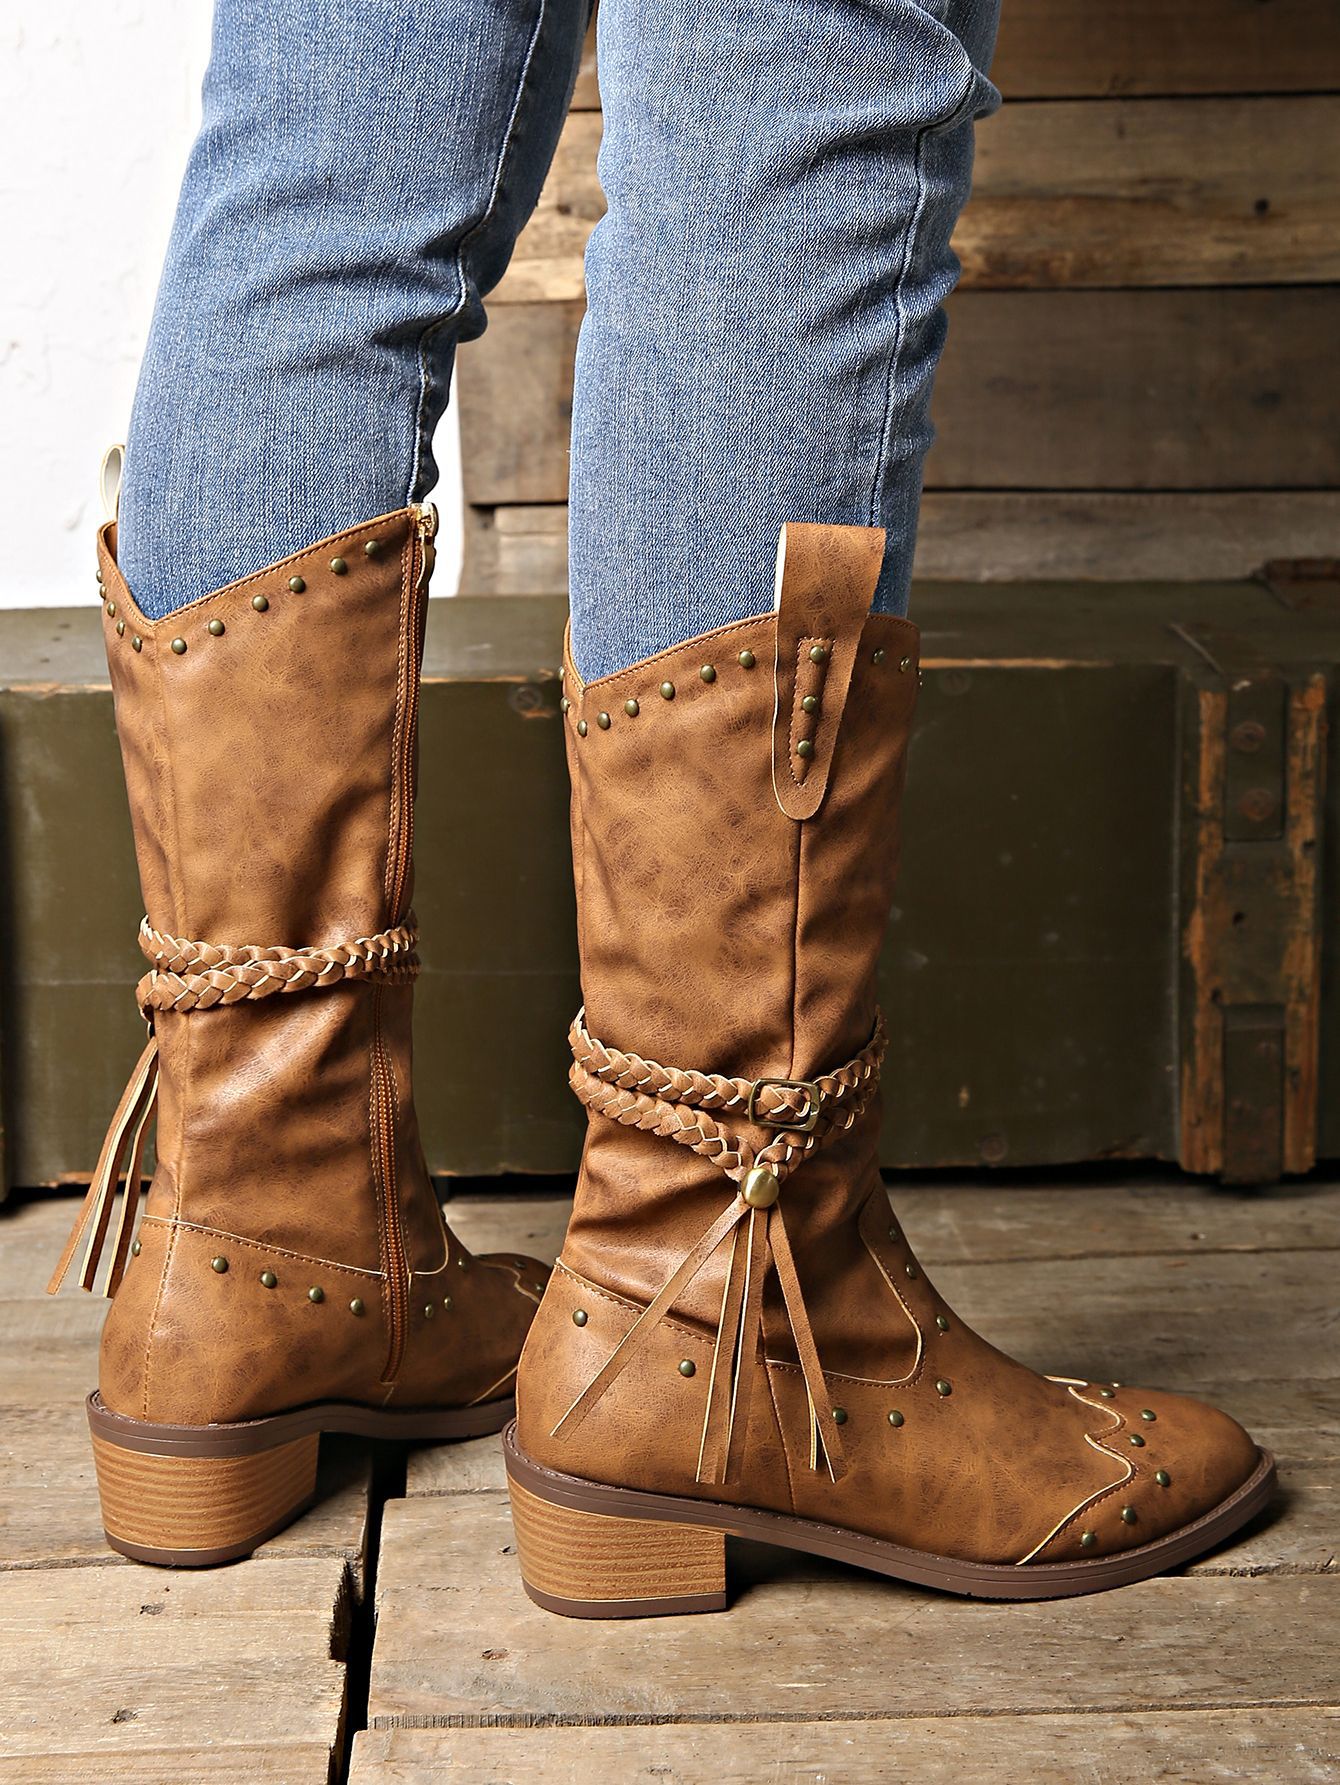 Women's Western Style Mid-Calf Cowboy Boots - Vintage Leather Look with Tassels and Buckles - Carvan Mart